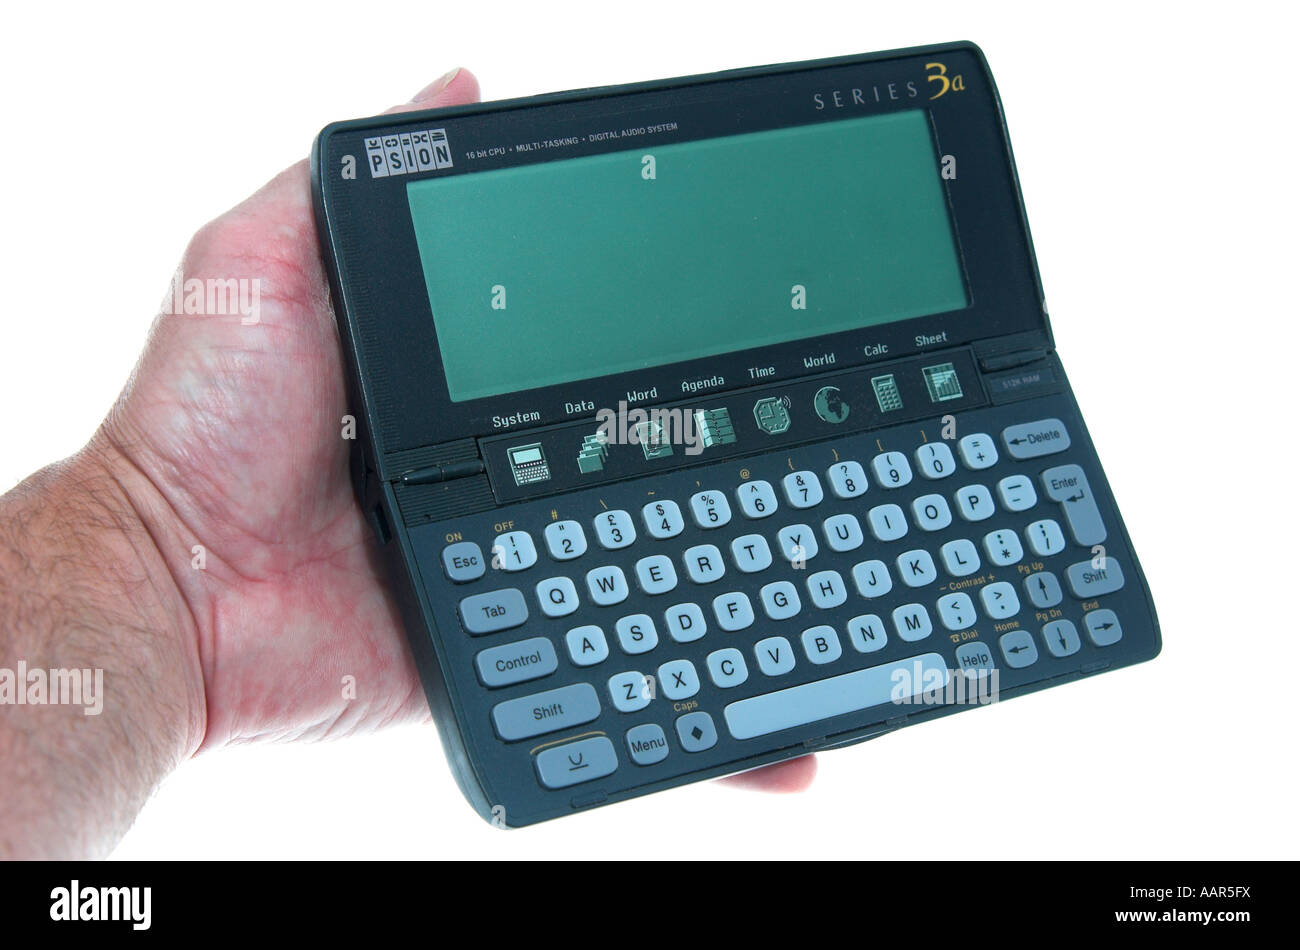 hand holding Psion computer keyboard and screen Stock Photo